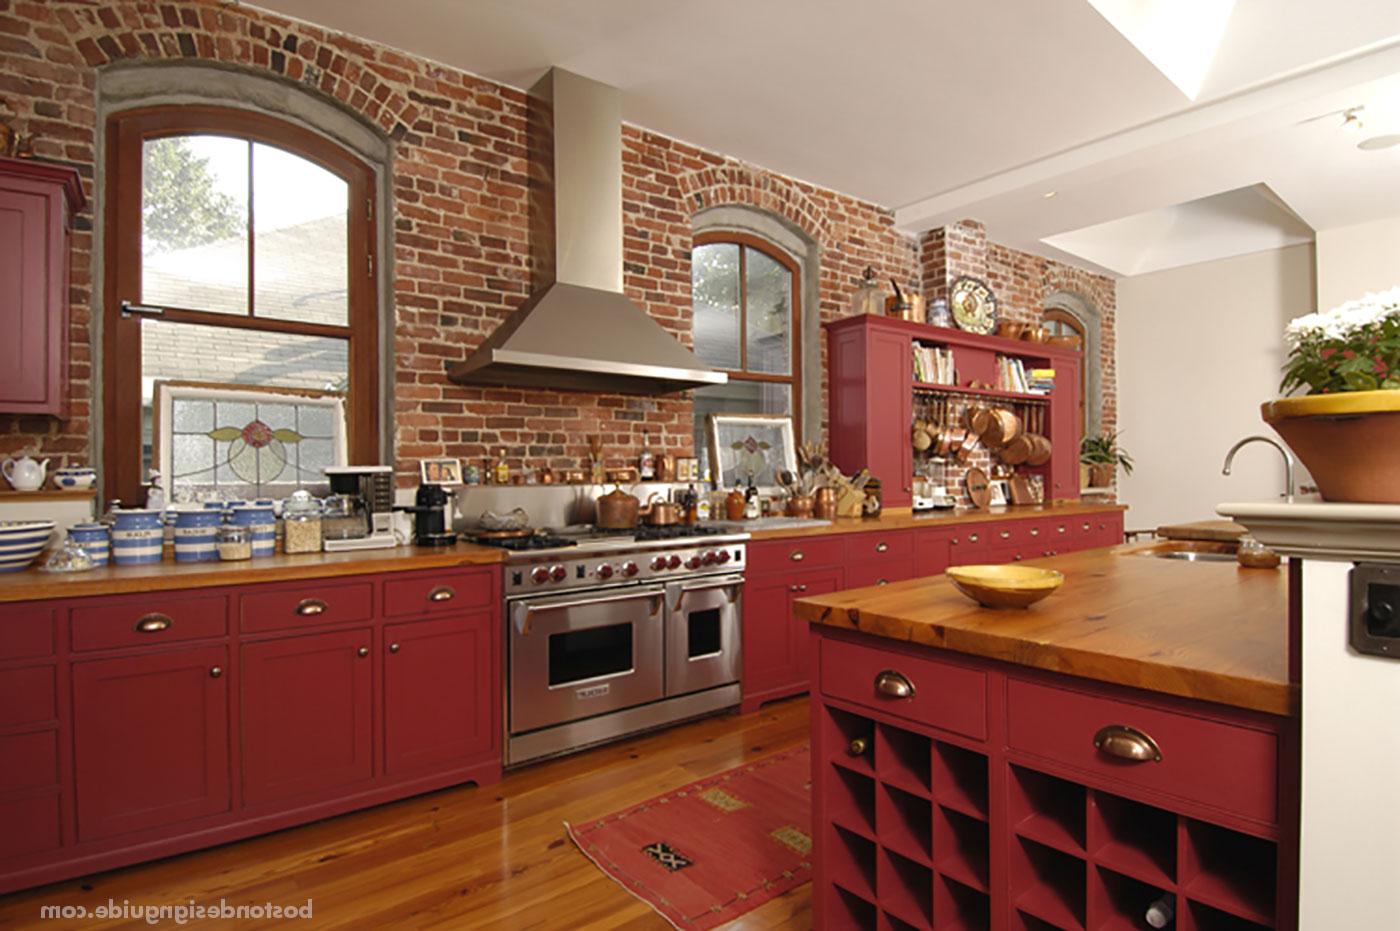 Red kitchen renovation with exposed brick by S + H建设